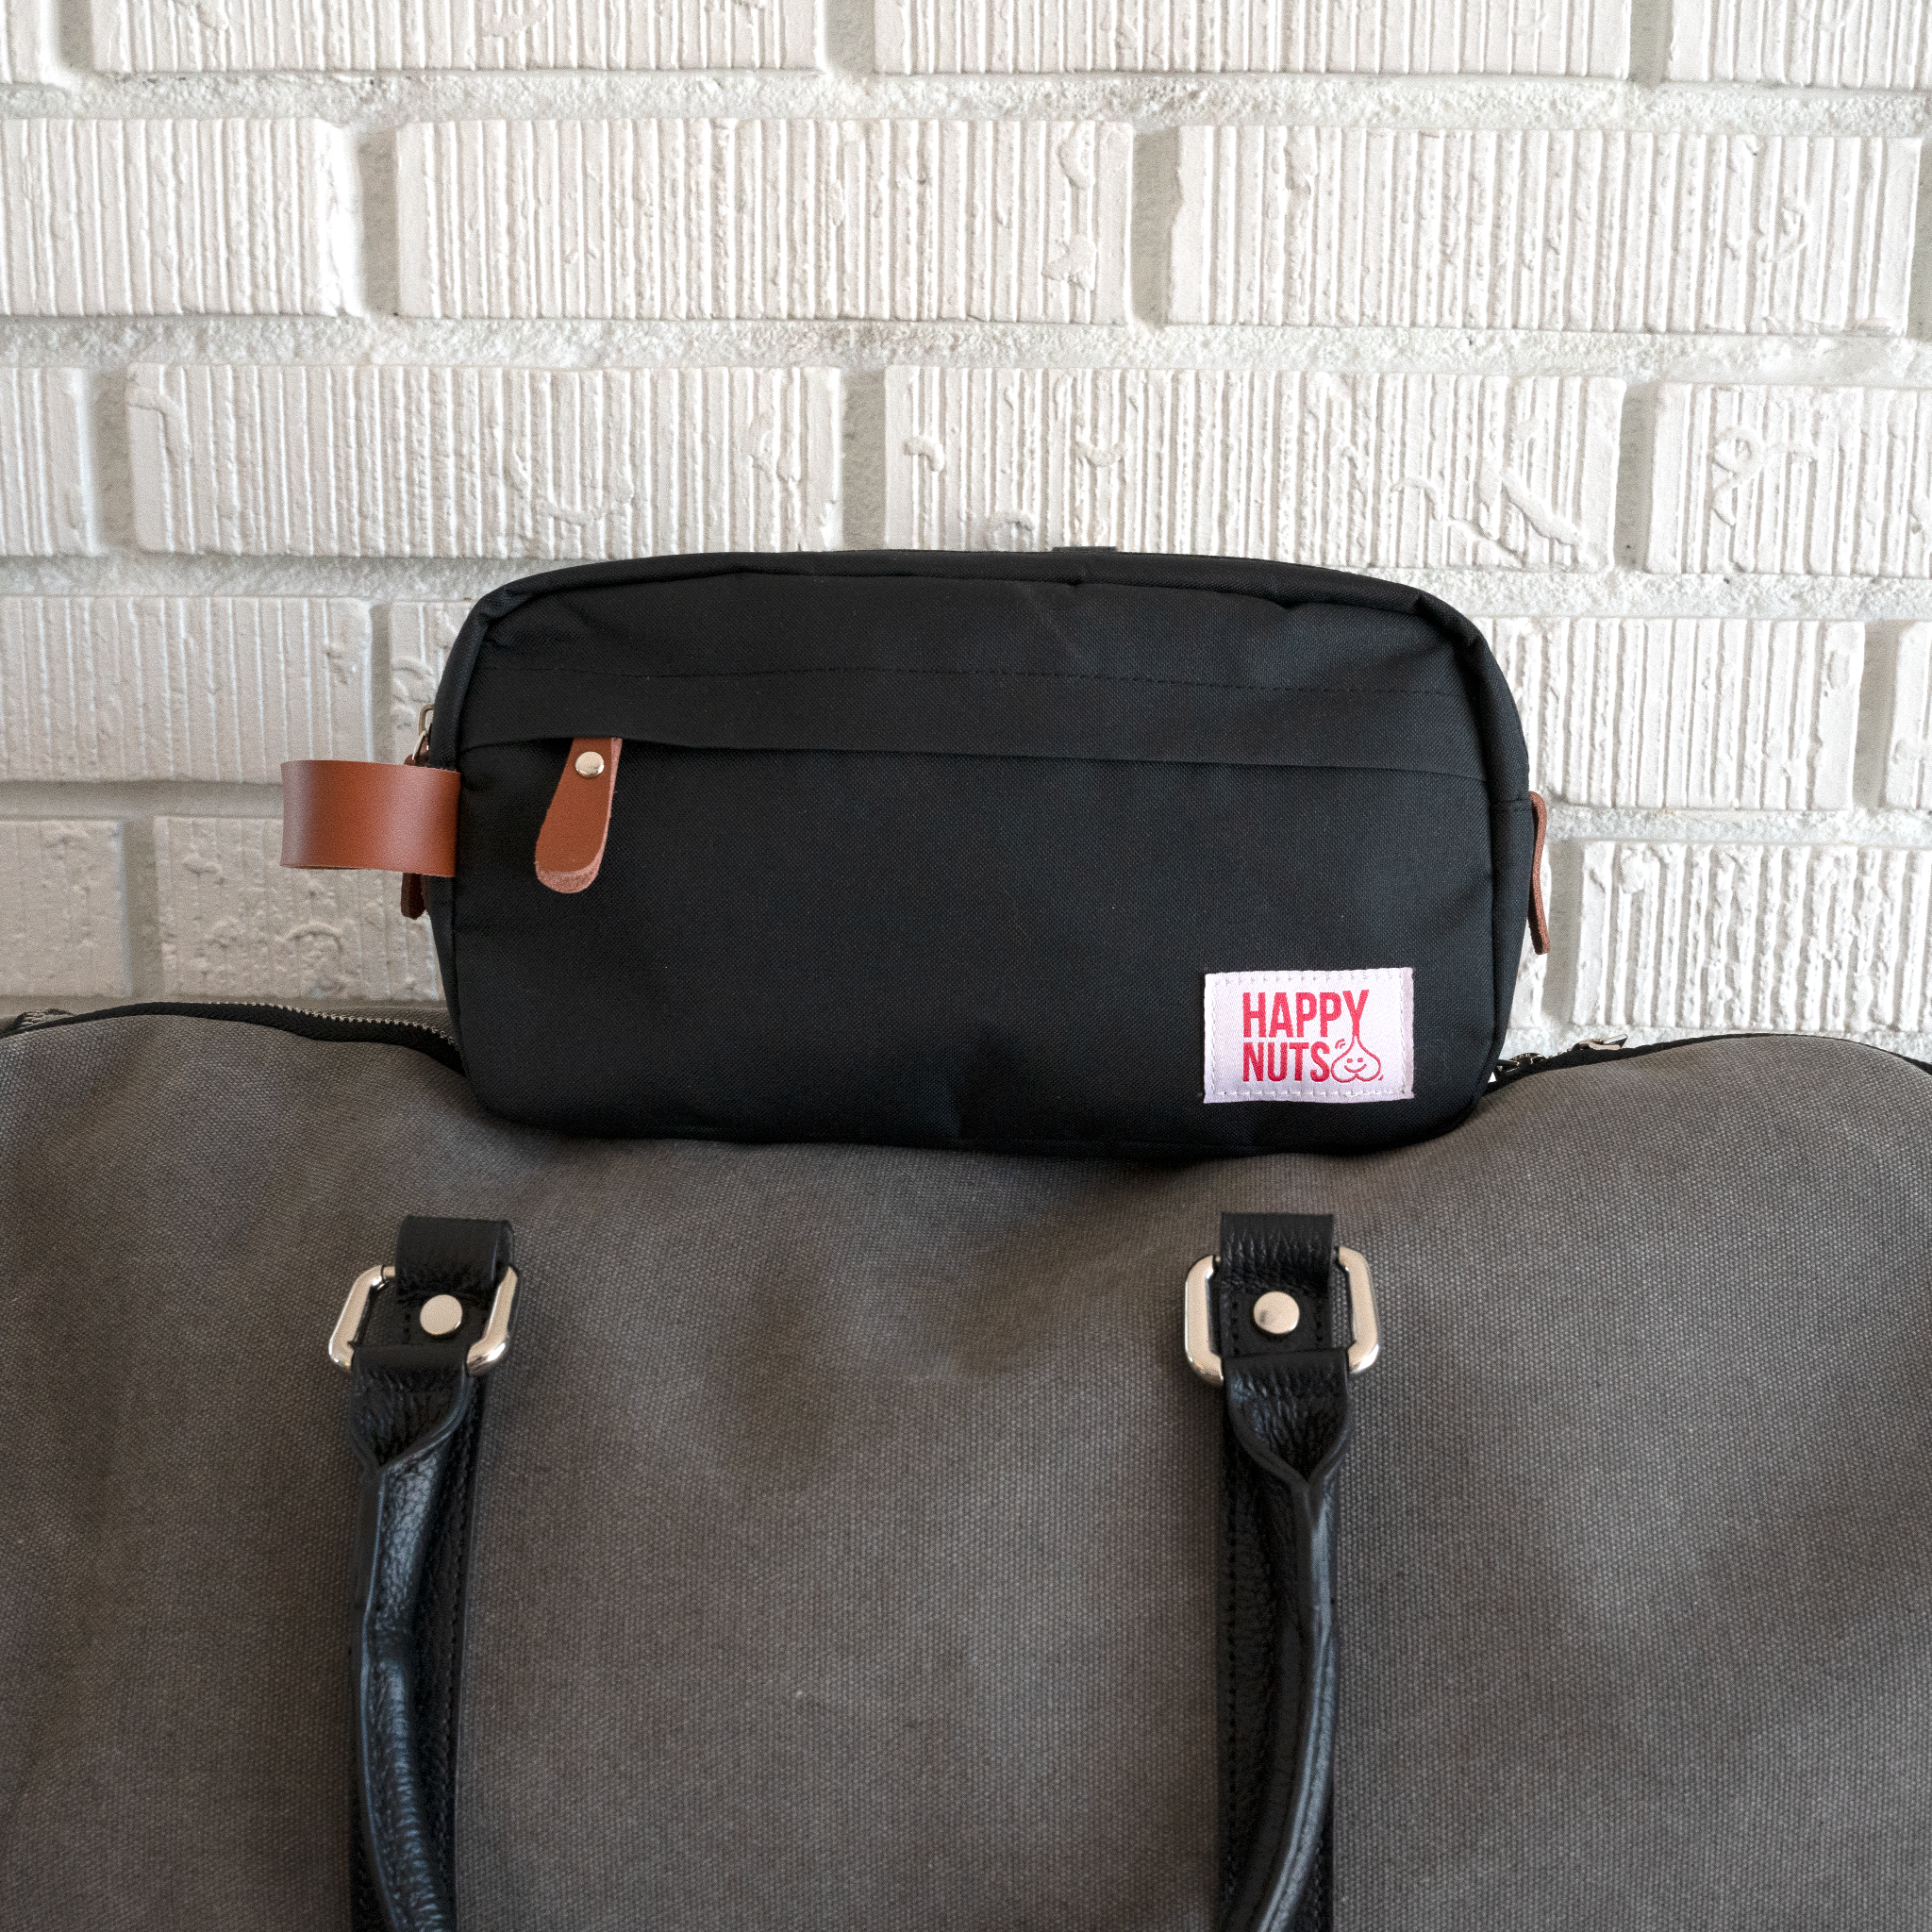 The Nut Sack Toiletry Bag